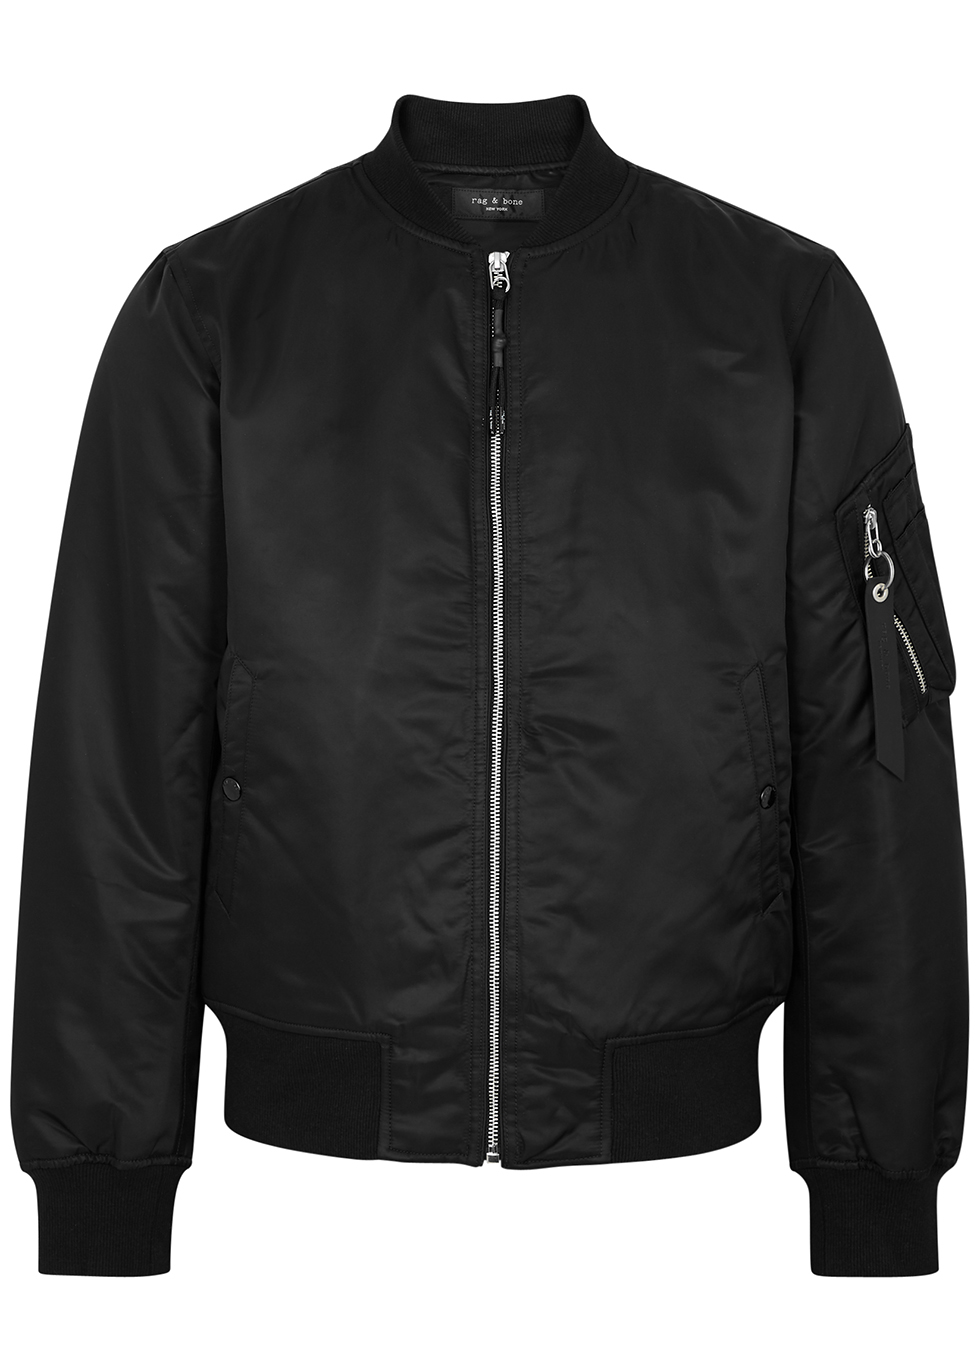 Rag & Bone Manston BomberJacket Review, Pricing, Sizing, and Where to Buy